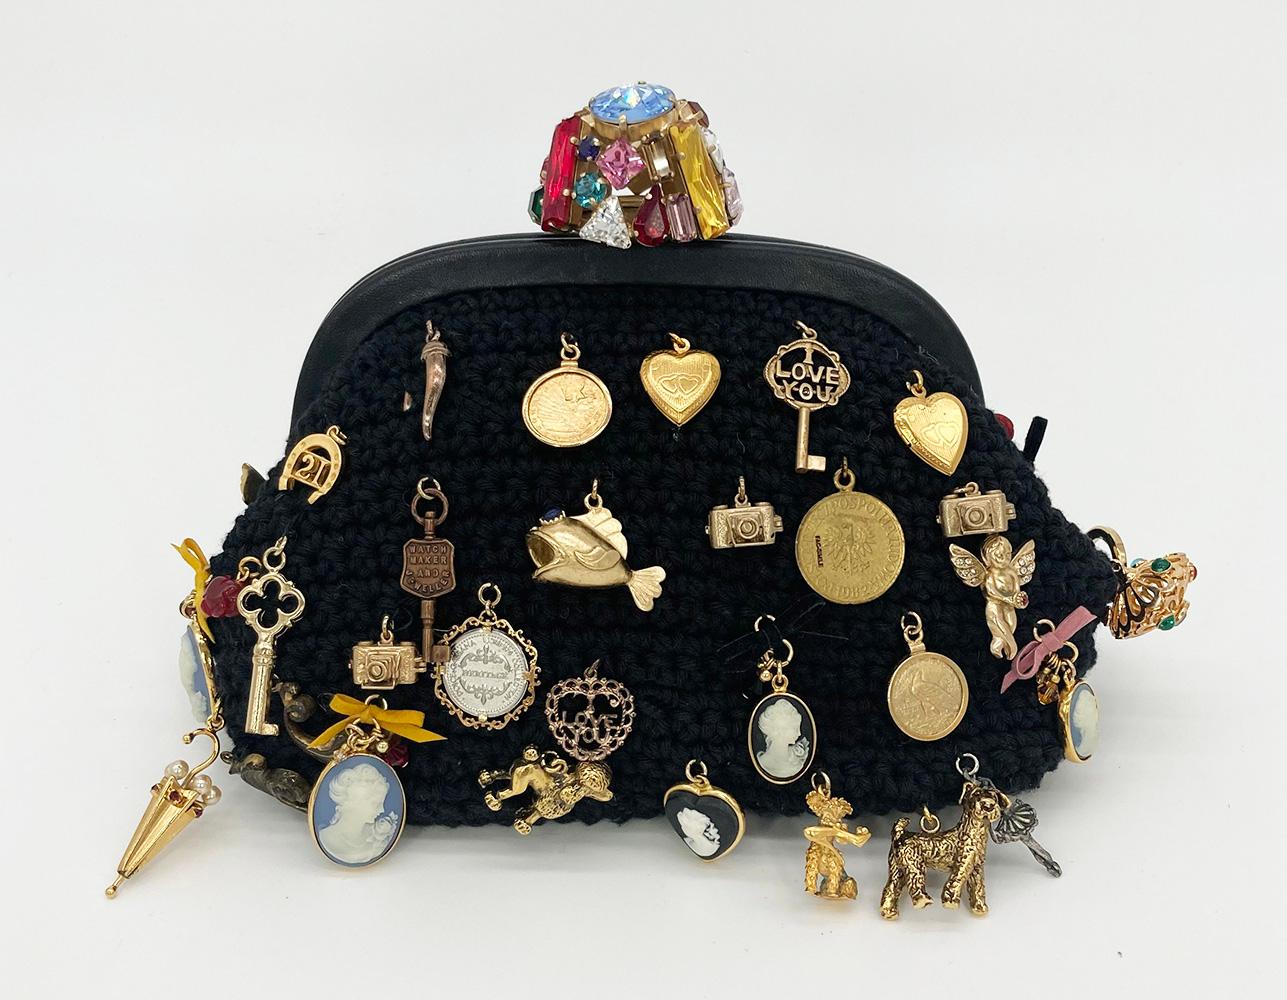 Rare and amazing Dolce and Gabbana black wool knit charm clutch in excellent condition. Black knit wool exterior trimmed with black leather edges and various multi tonal charms along front side. Top multicolored gemstone closure lifts to reveal a